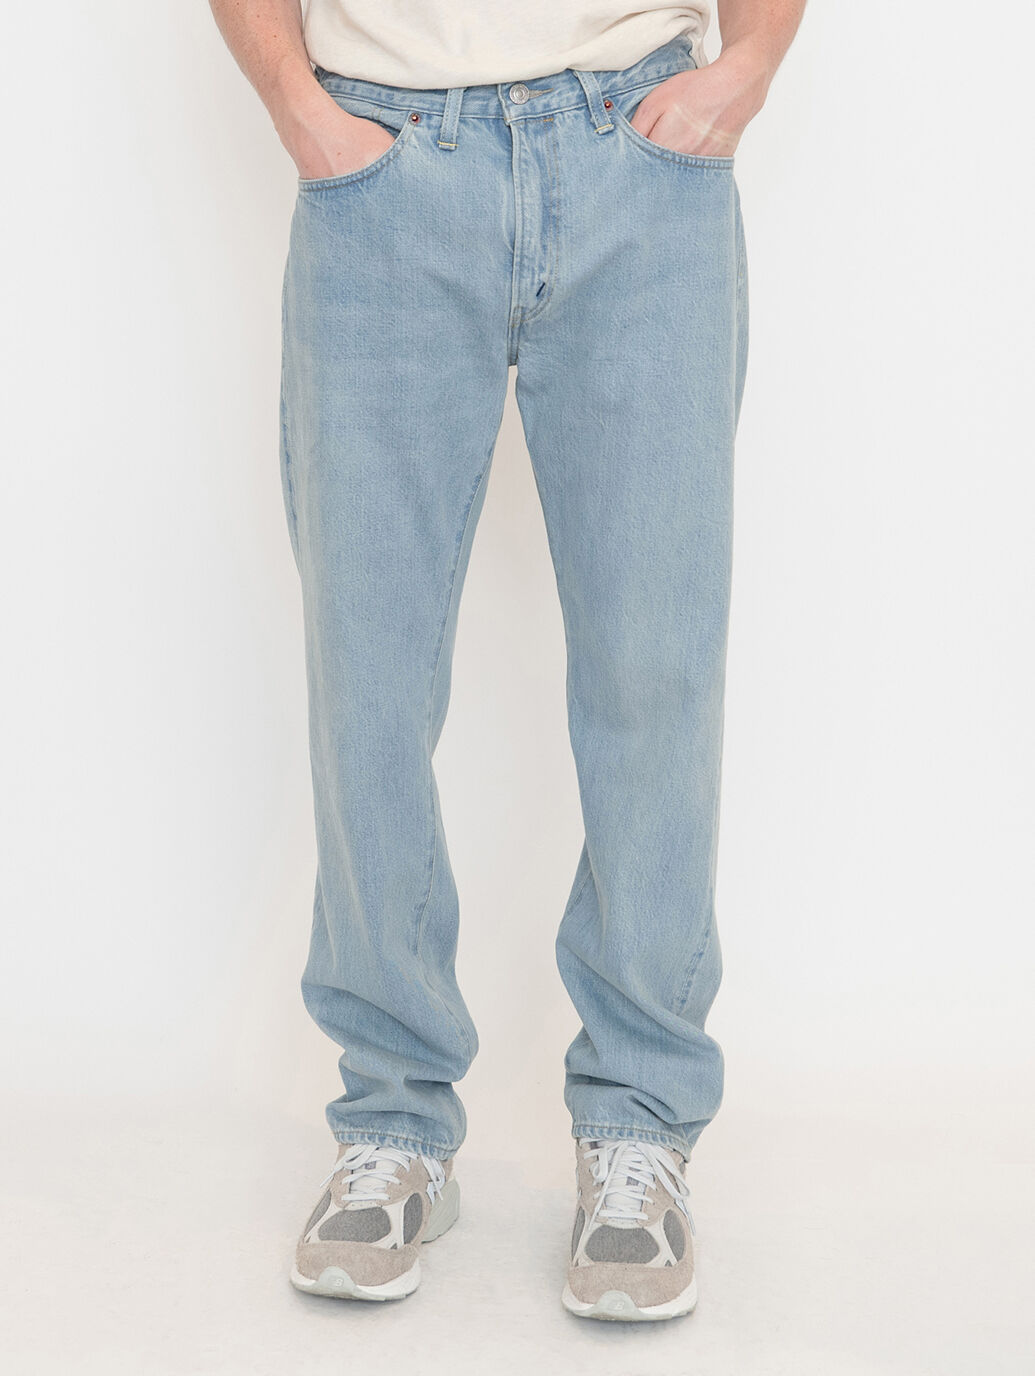 LEVI'S® VINTAGE CLOTHING1954モデル 501® JEANS Place In Space 